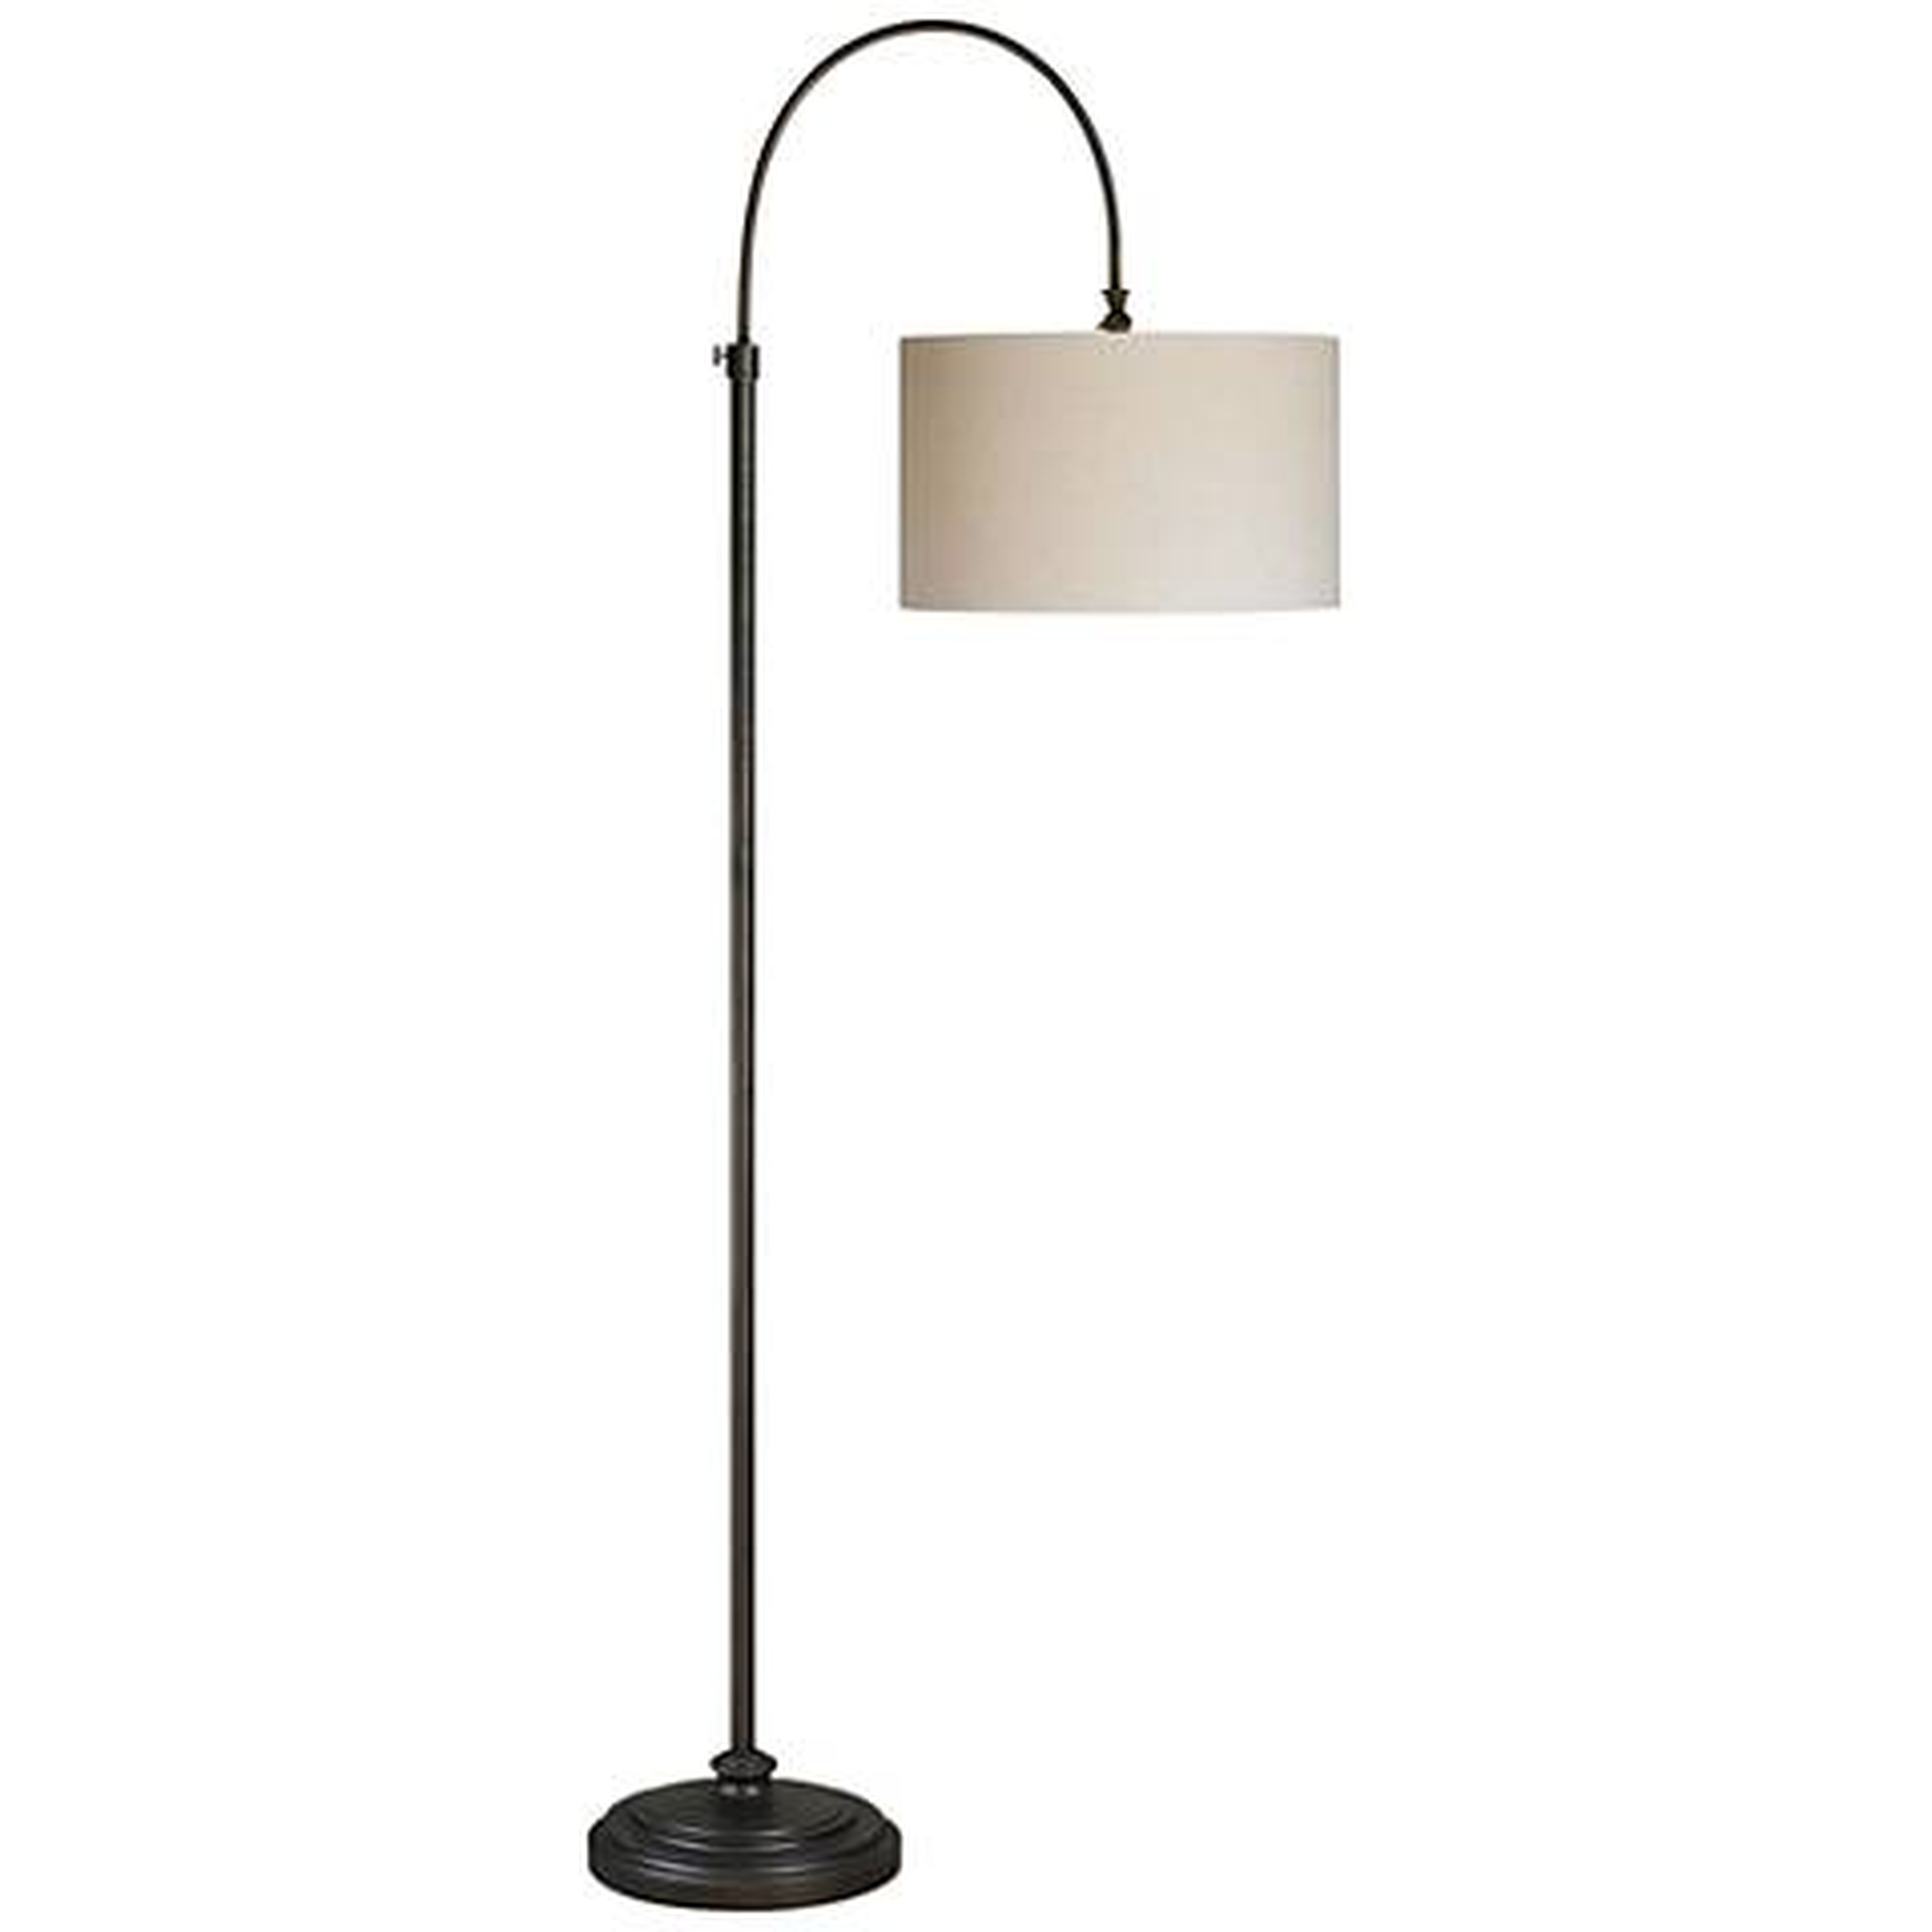 Forty West Reagan Oil Rubbed Bronze Adjustable Arc Floor Lamp - Lamps Plus